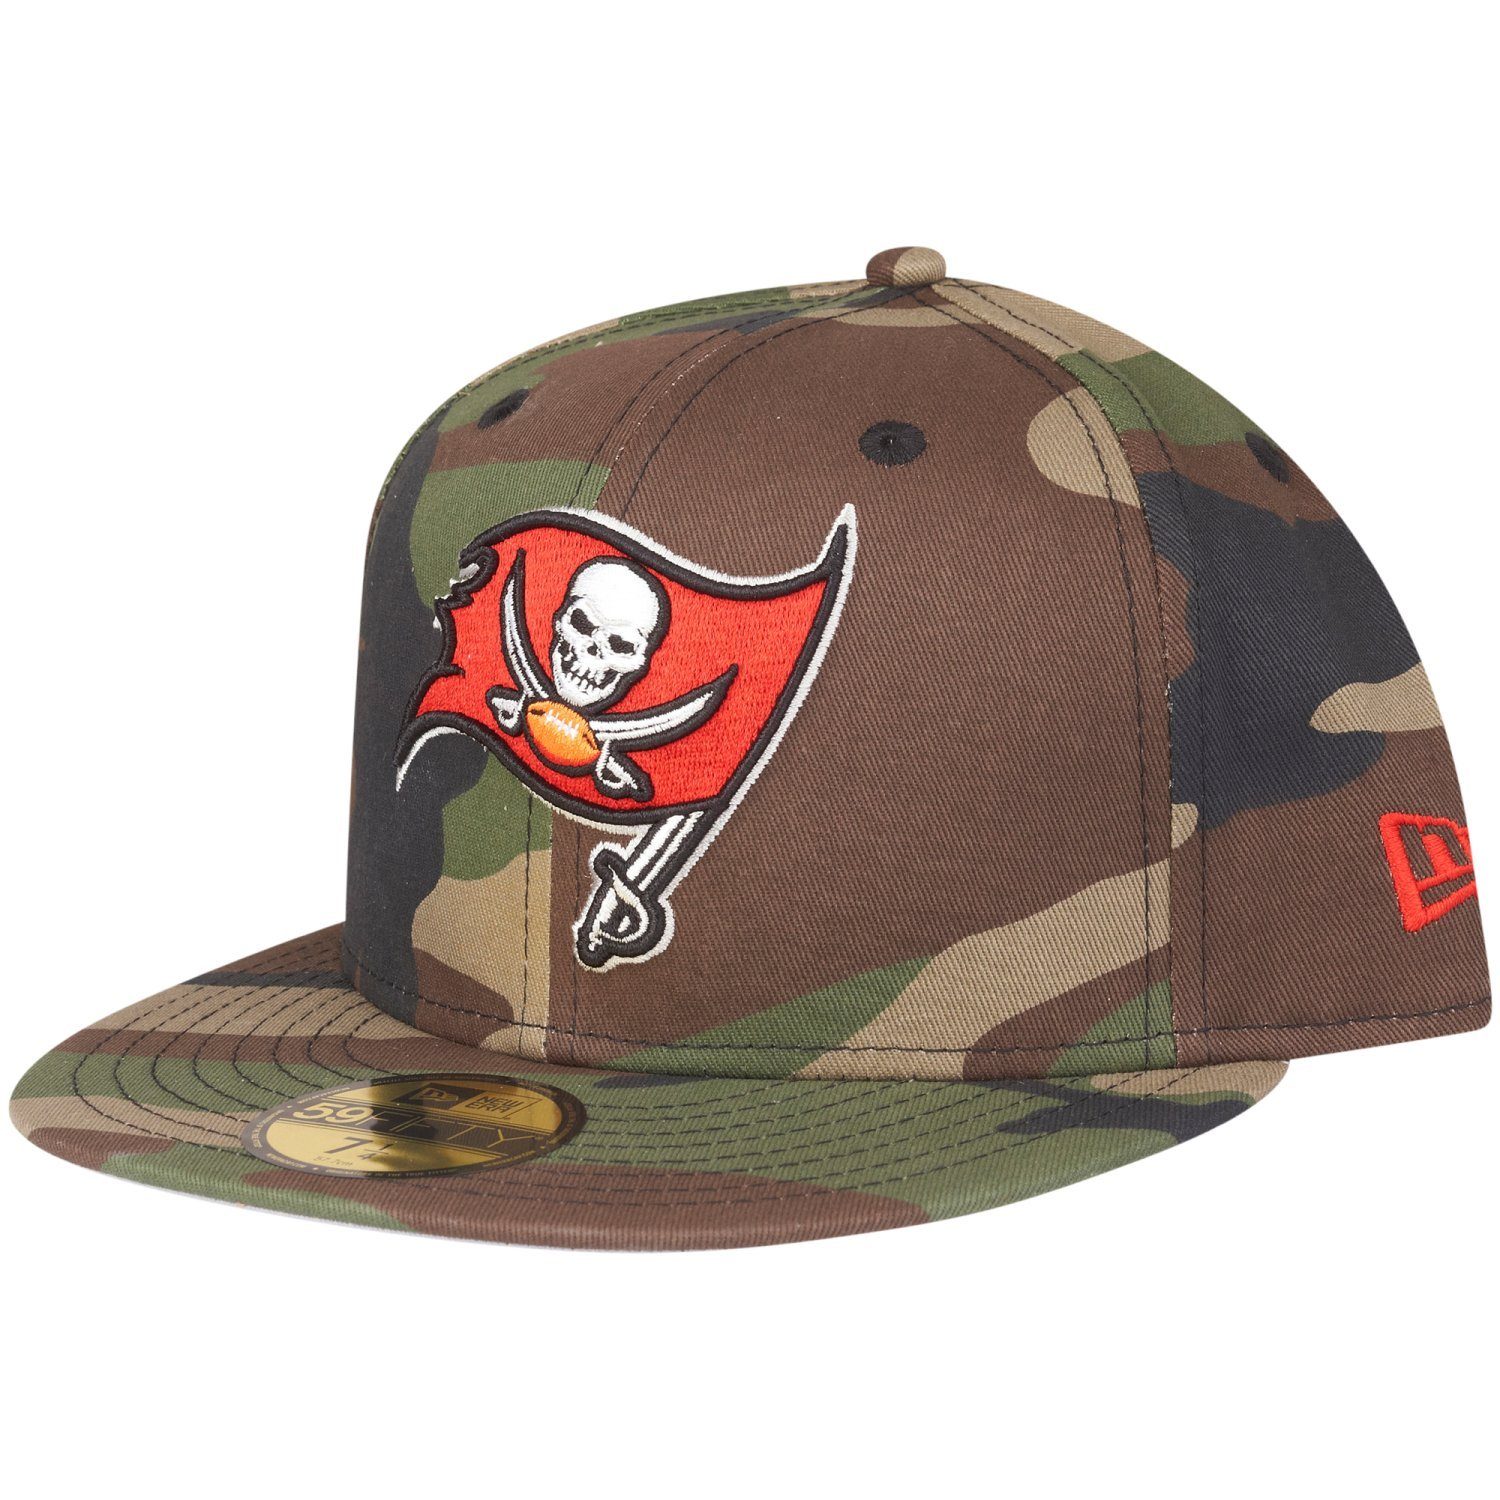 New Era Fitted Cap Bay 59Fifty Buccaneers Tampa